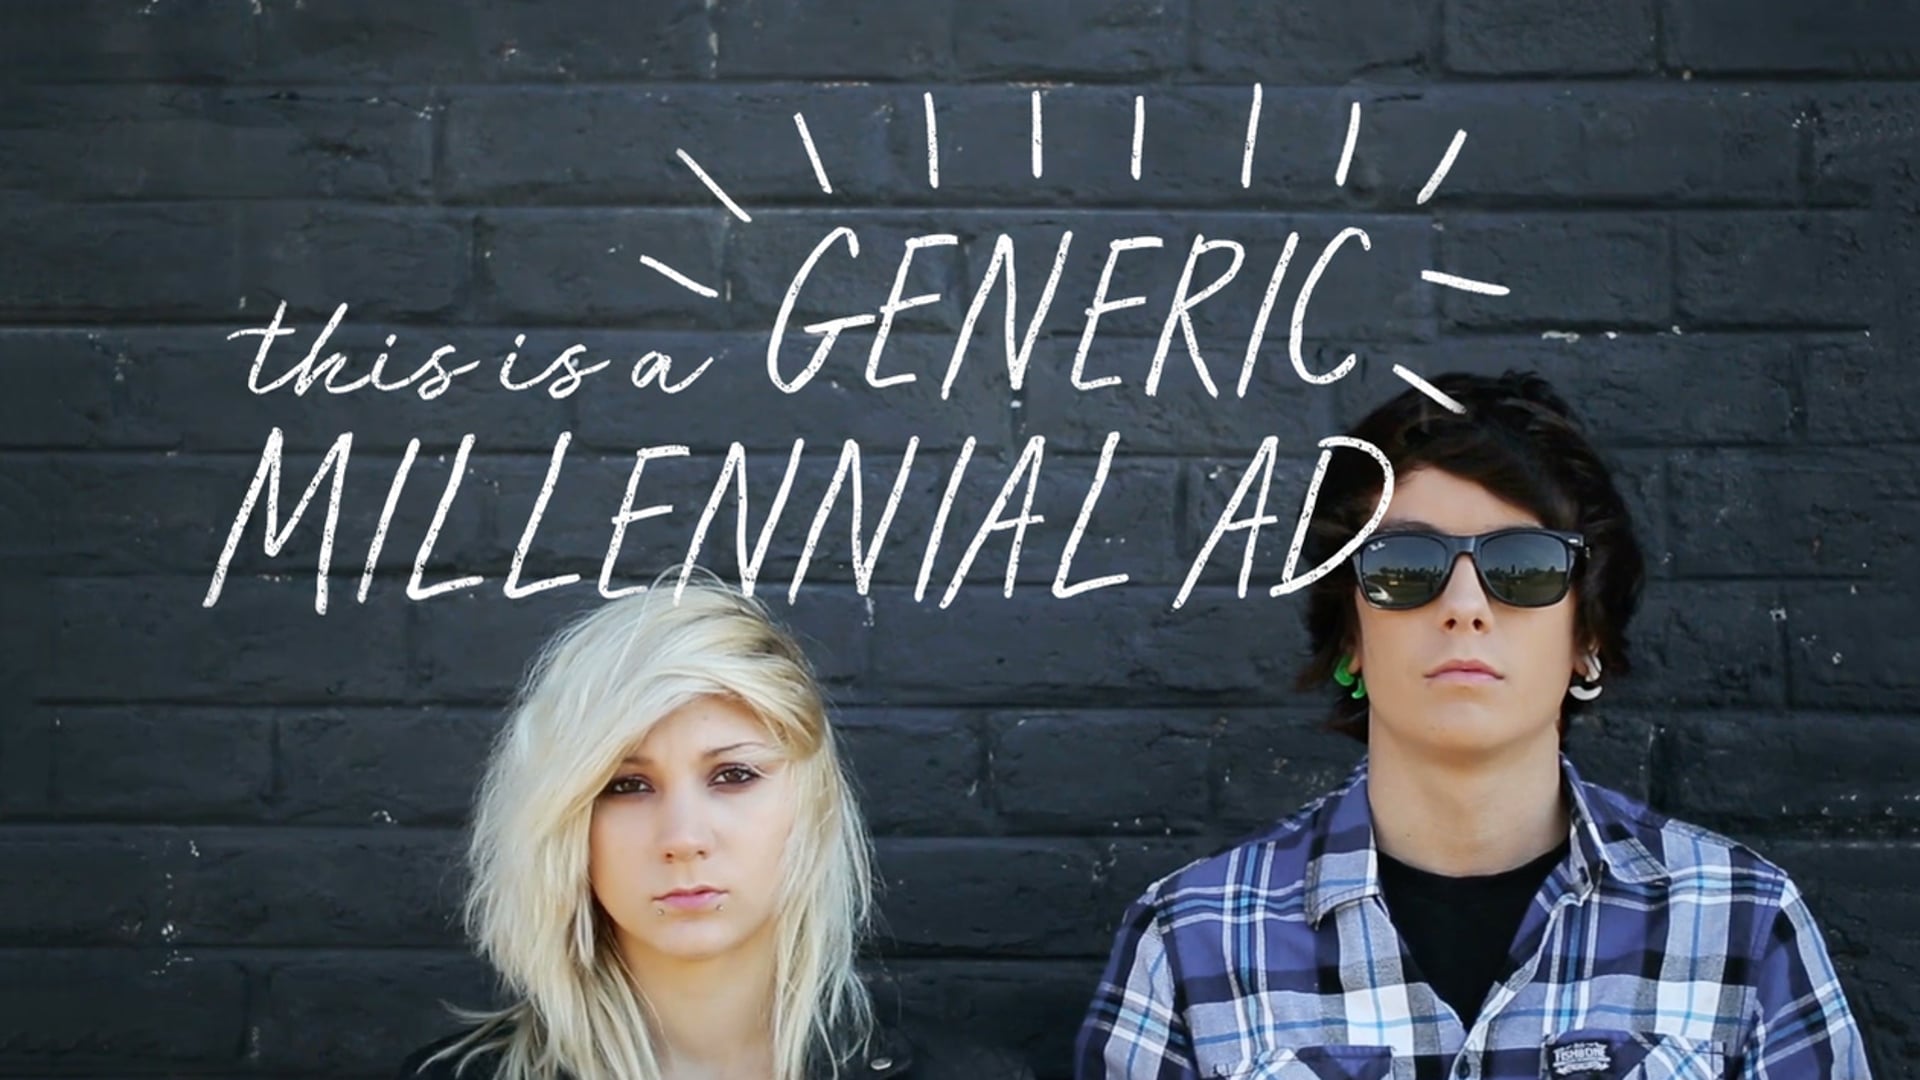 This Is a Generic Millennial Ad